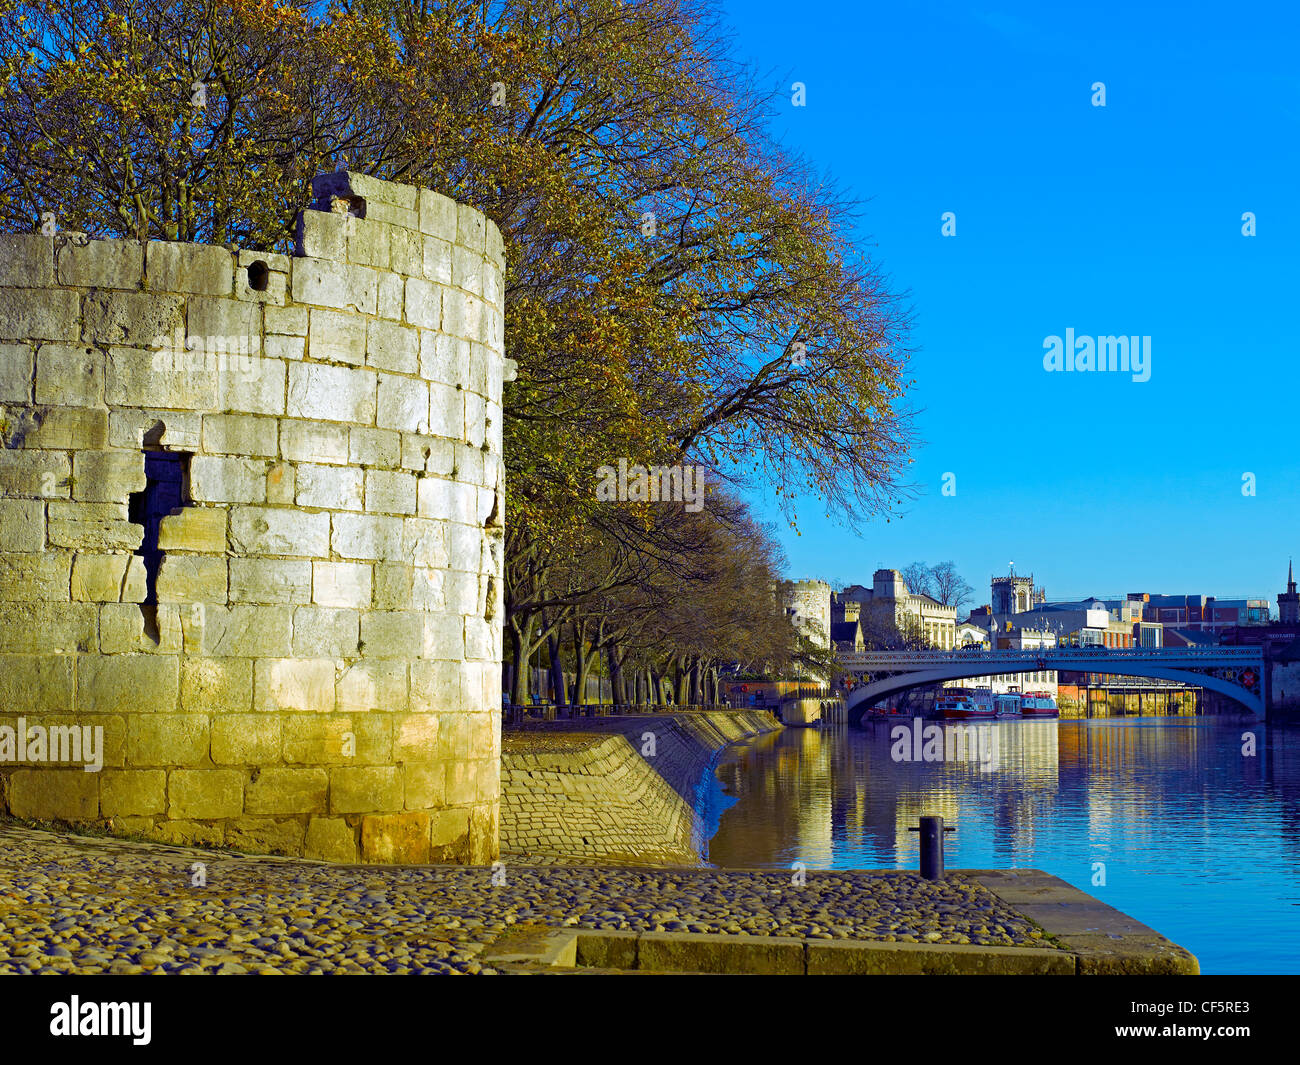 The remains of a tower, part of the Marygate walls on the North bank of the River Ouse. Stock Photo